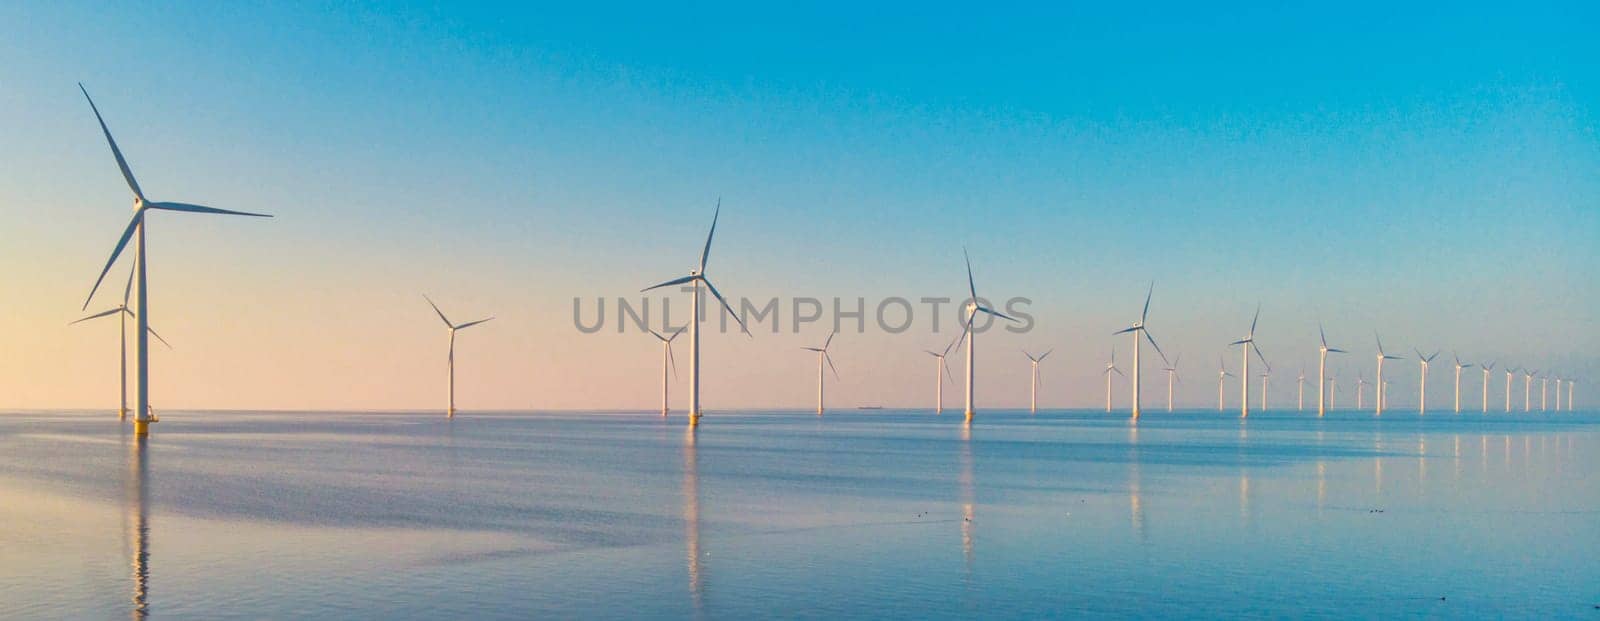 Windmill turbines at sea, drone aerial view from above at a huge windmill park in the Netherlands. Green Energy Transformation in the Netherlands Europe, windmills at sunset